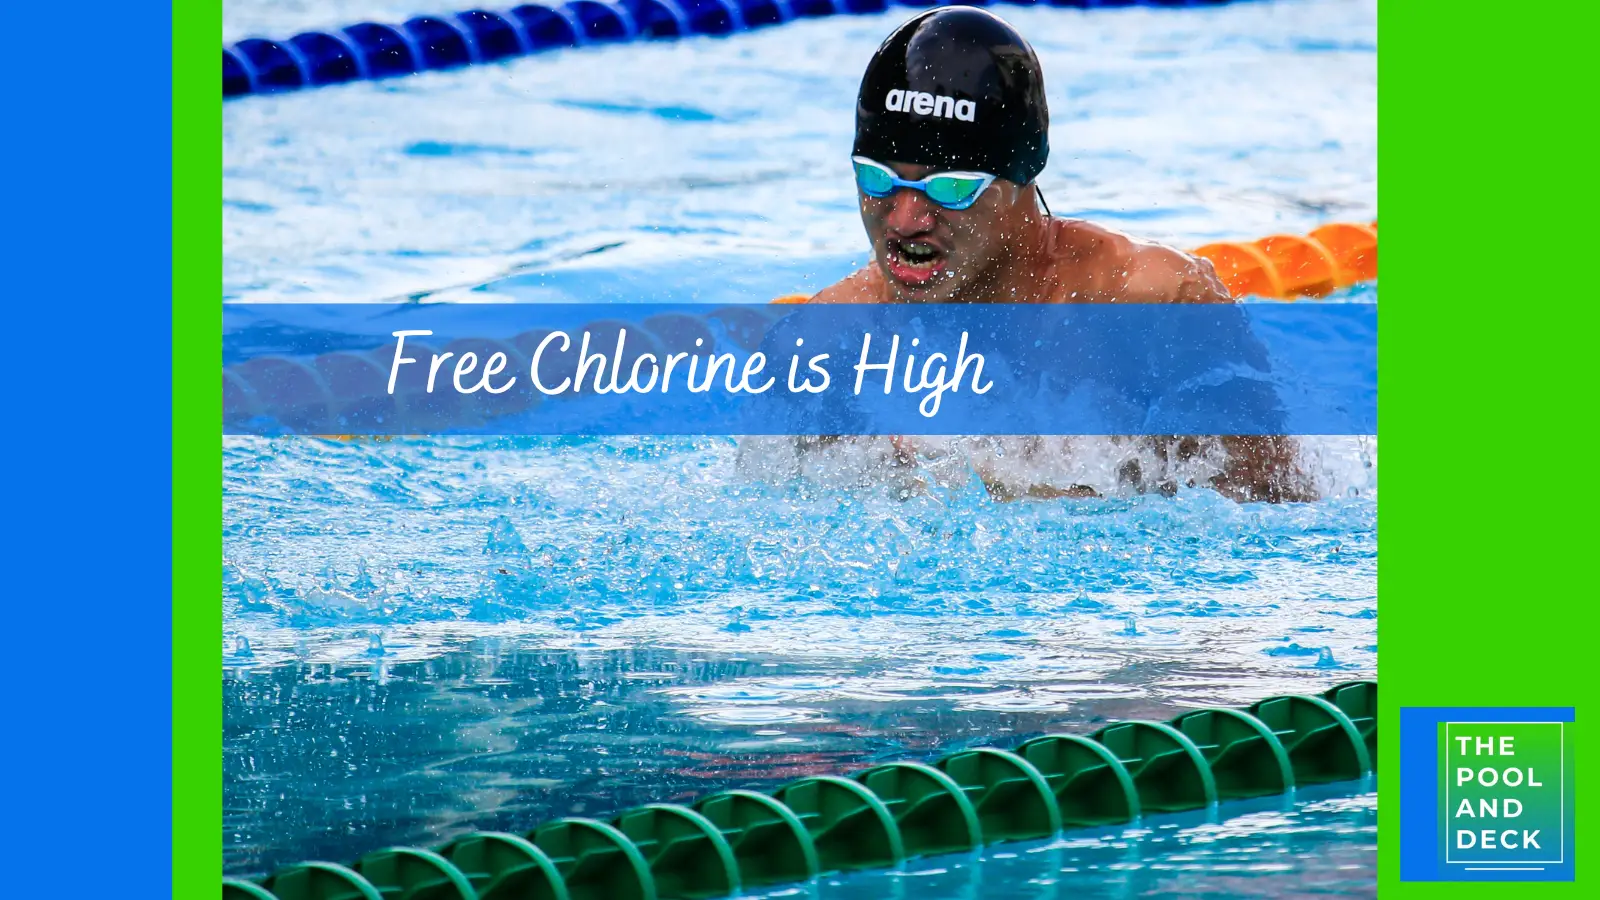 Free Chlorine is High: Cause, Effect & Solution